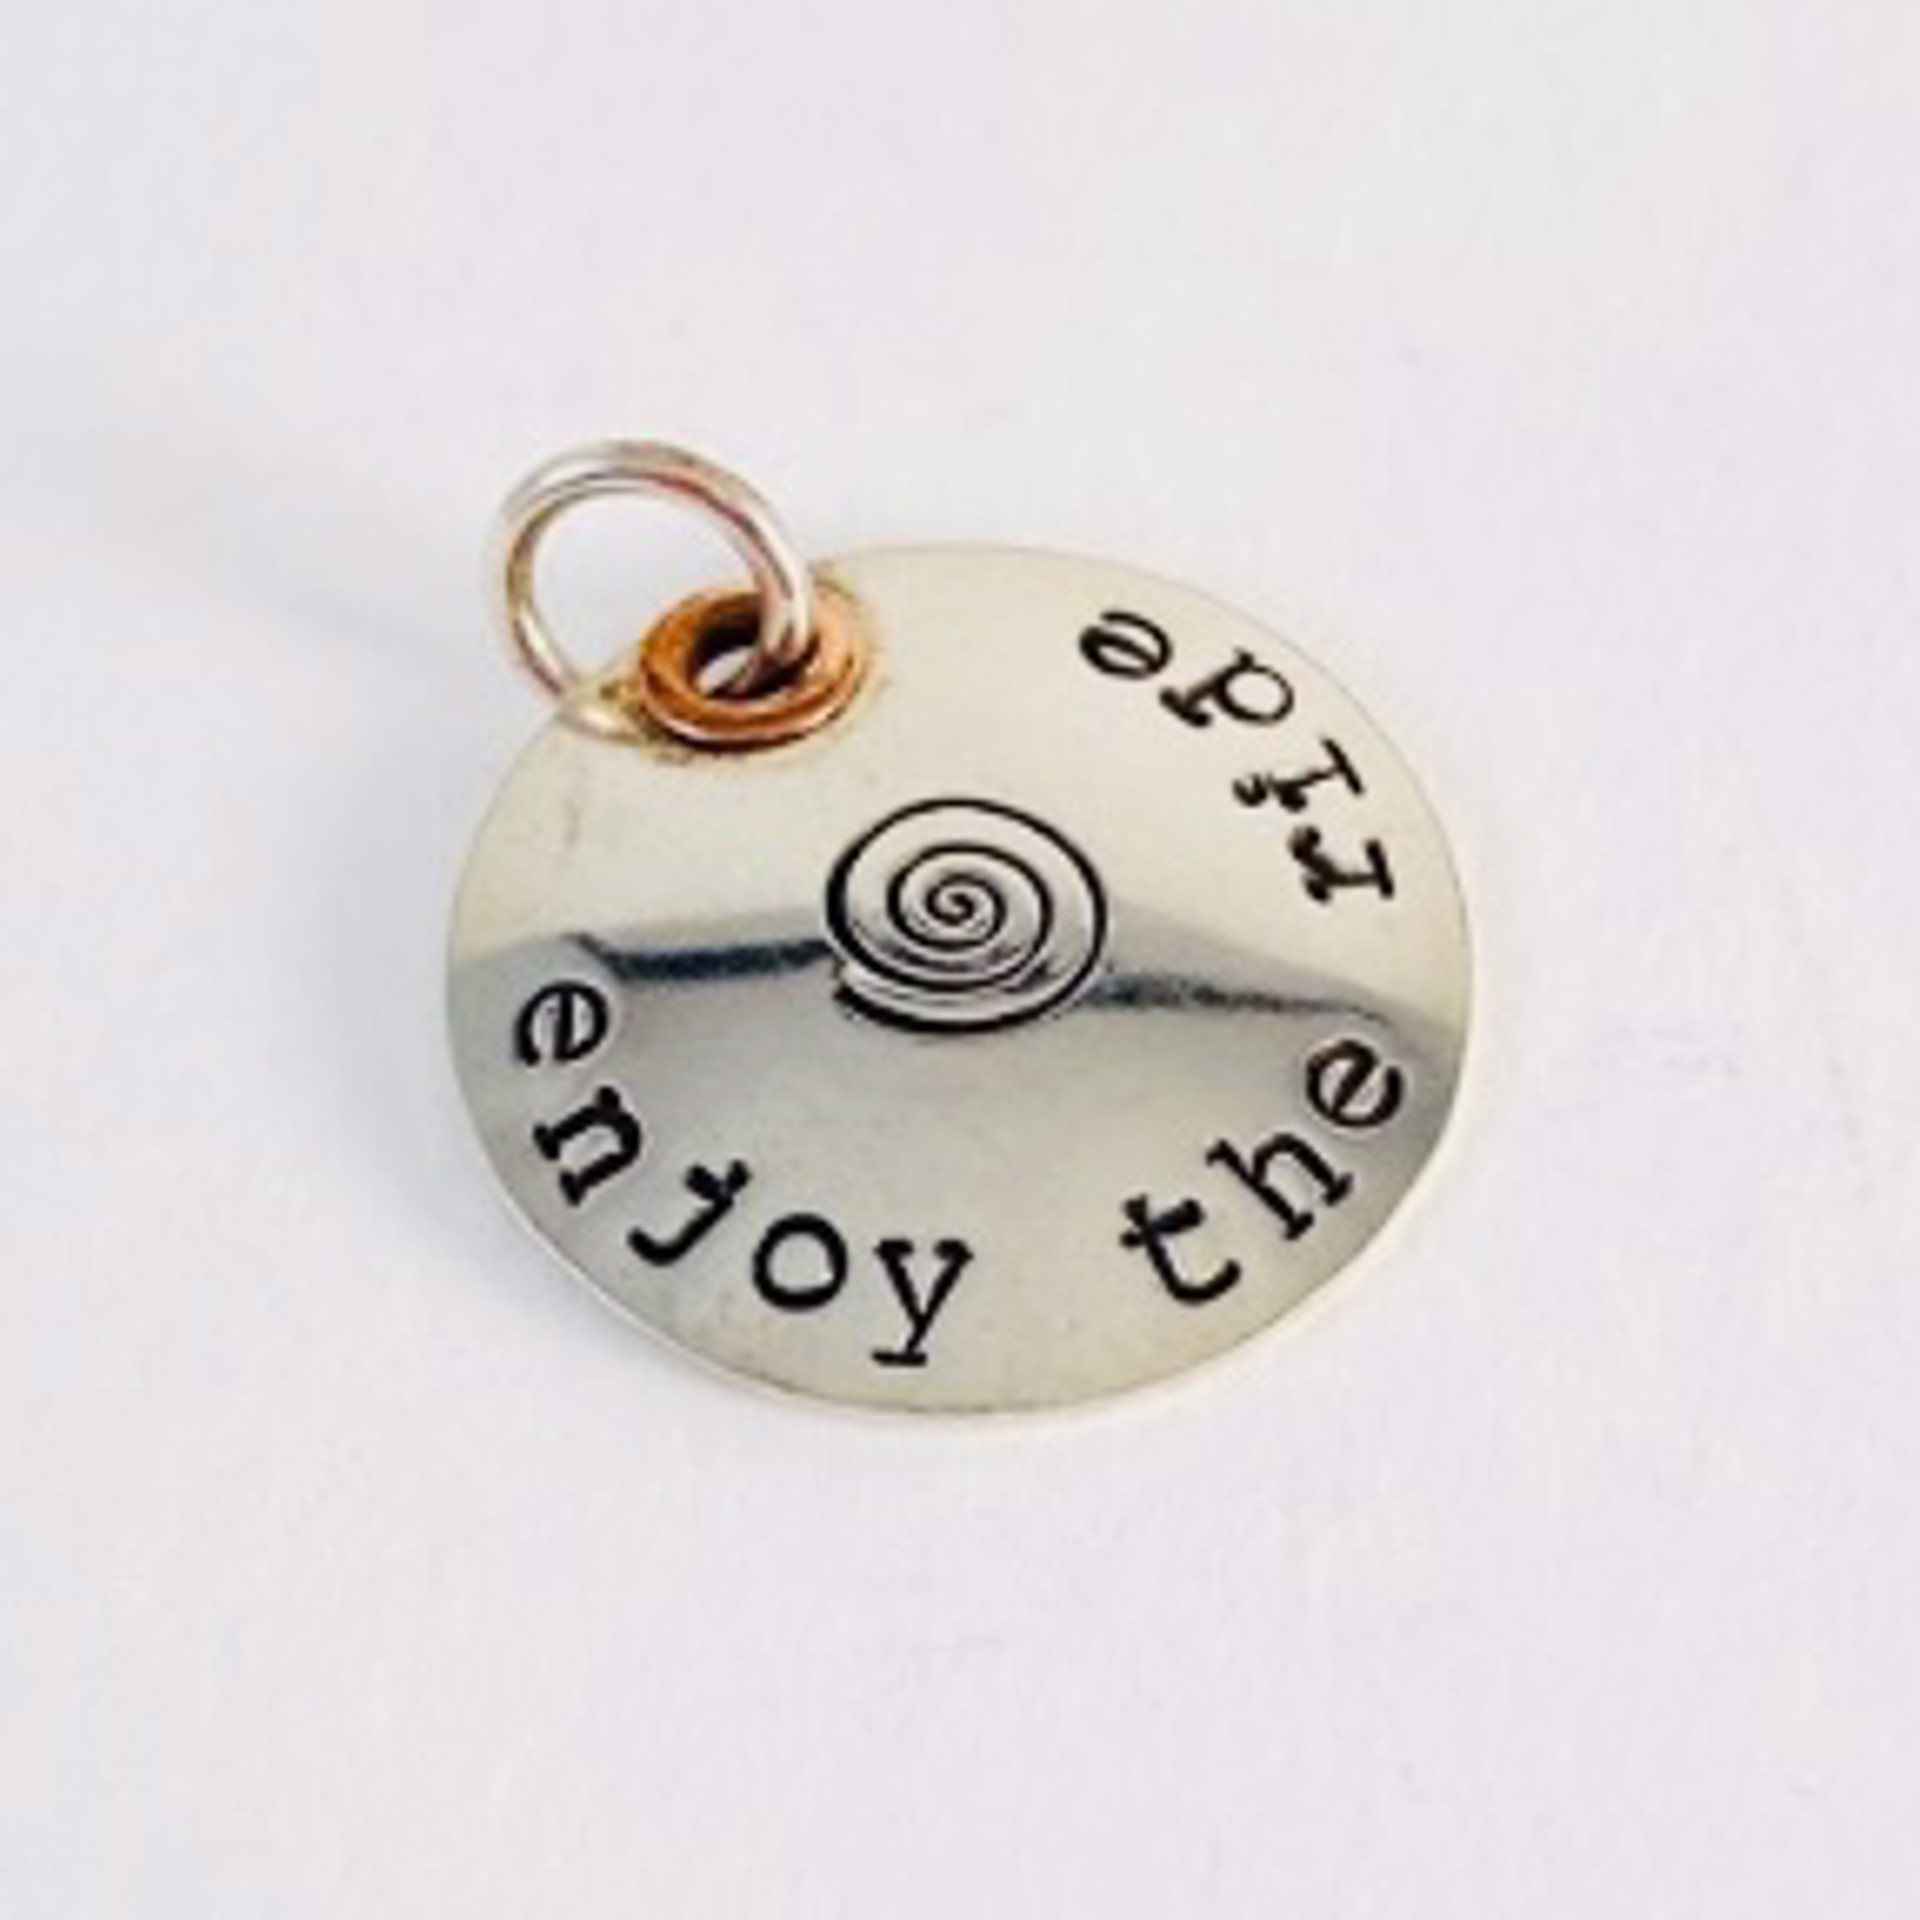 Enjoy The Ride Pendant by Shelby Lee - jewelry